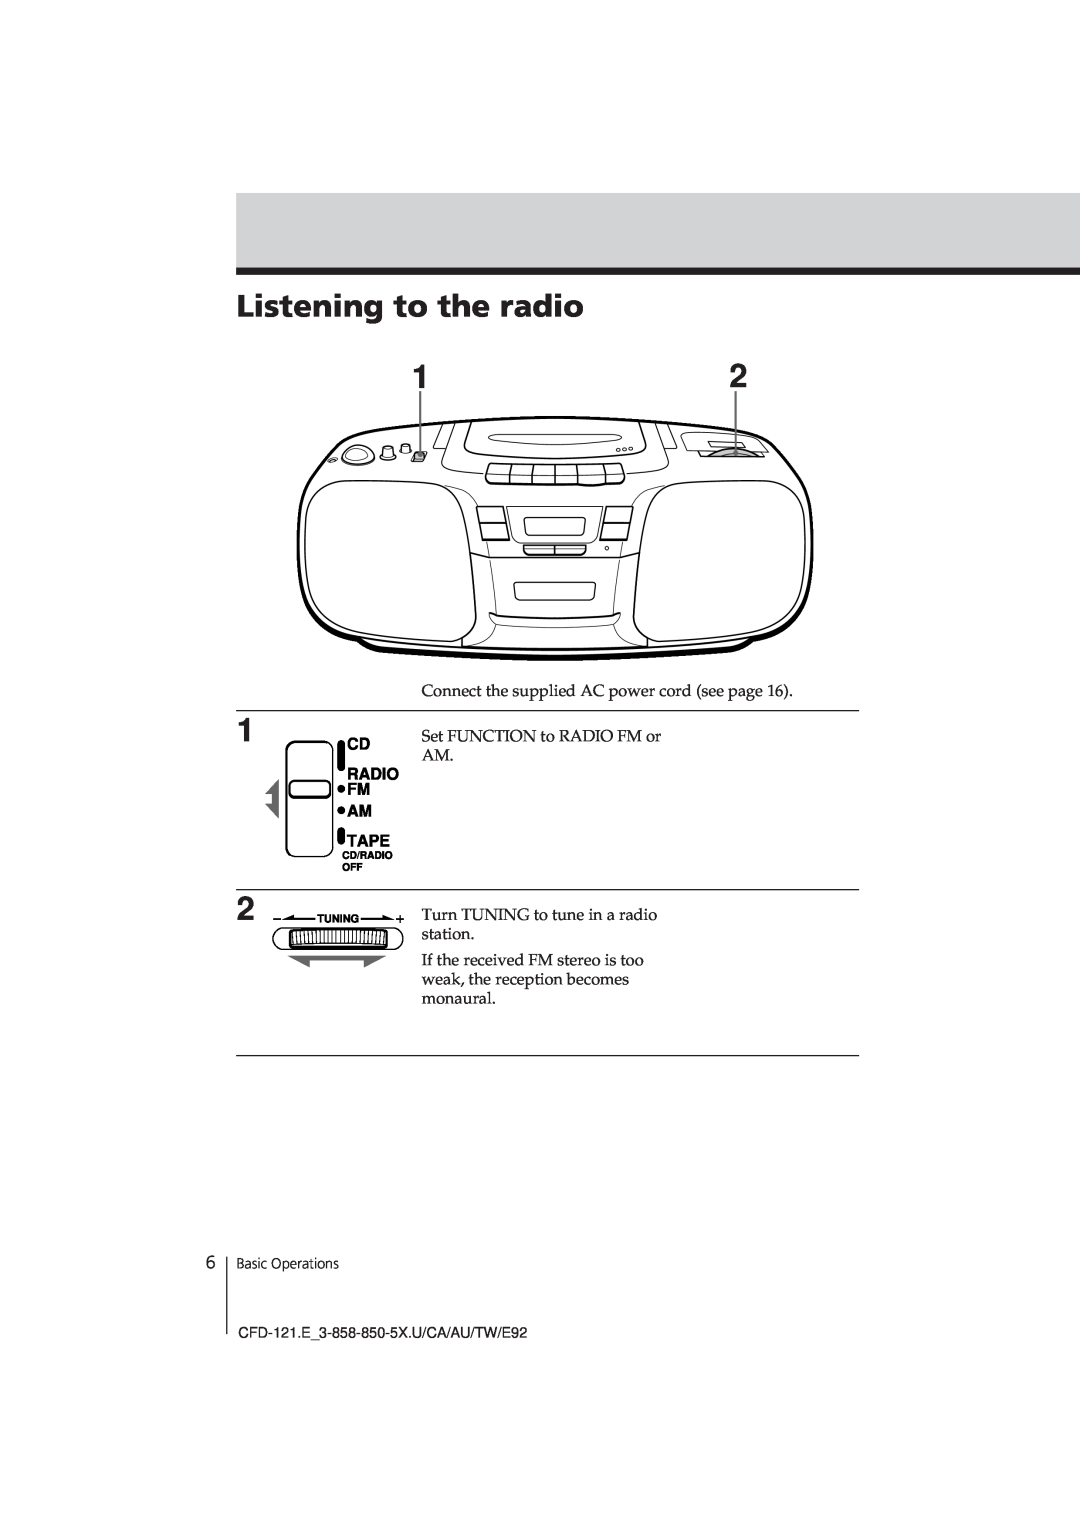 Sony CFD-121 Listening to the radio, Connect the supplied AC power cord see page, Set FUNCTION to RADIO FM or, station 